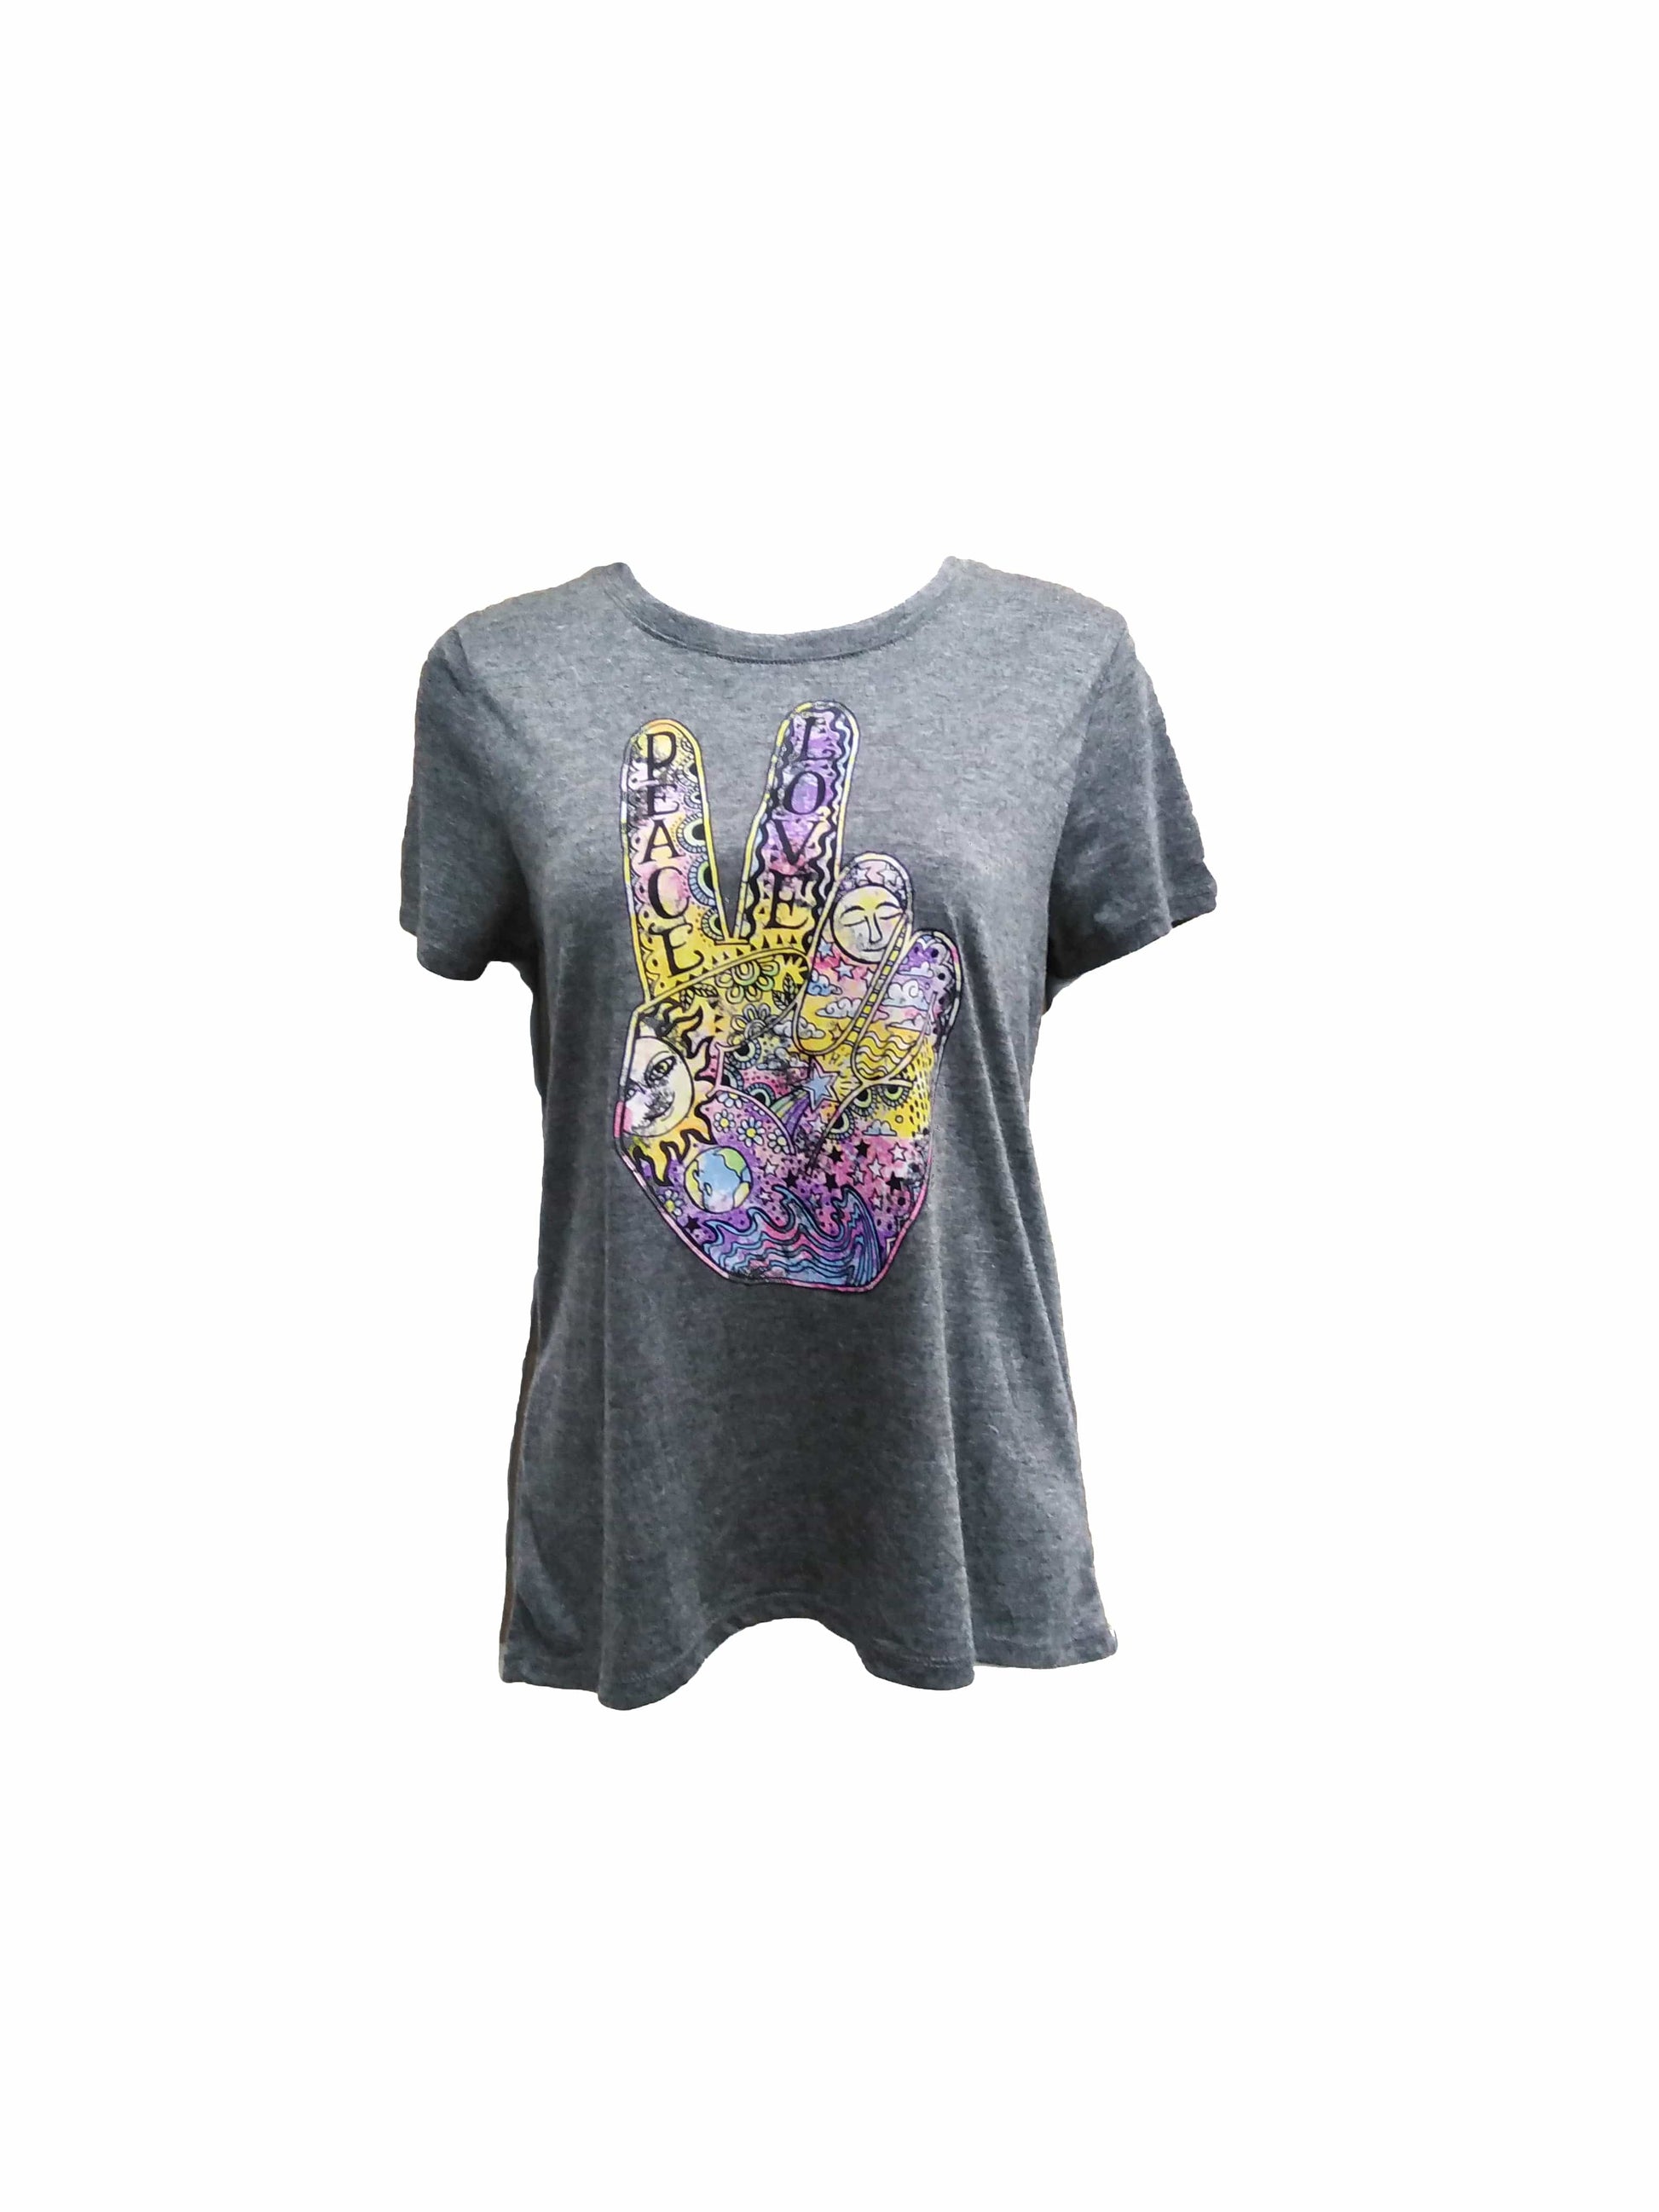 Modern Lux Womens Tops Large / Grey Short Sleeve Top